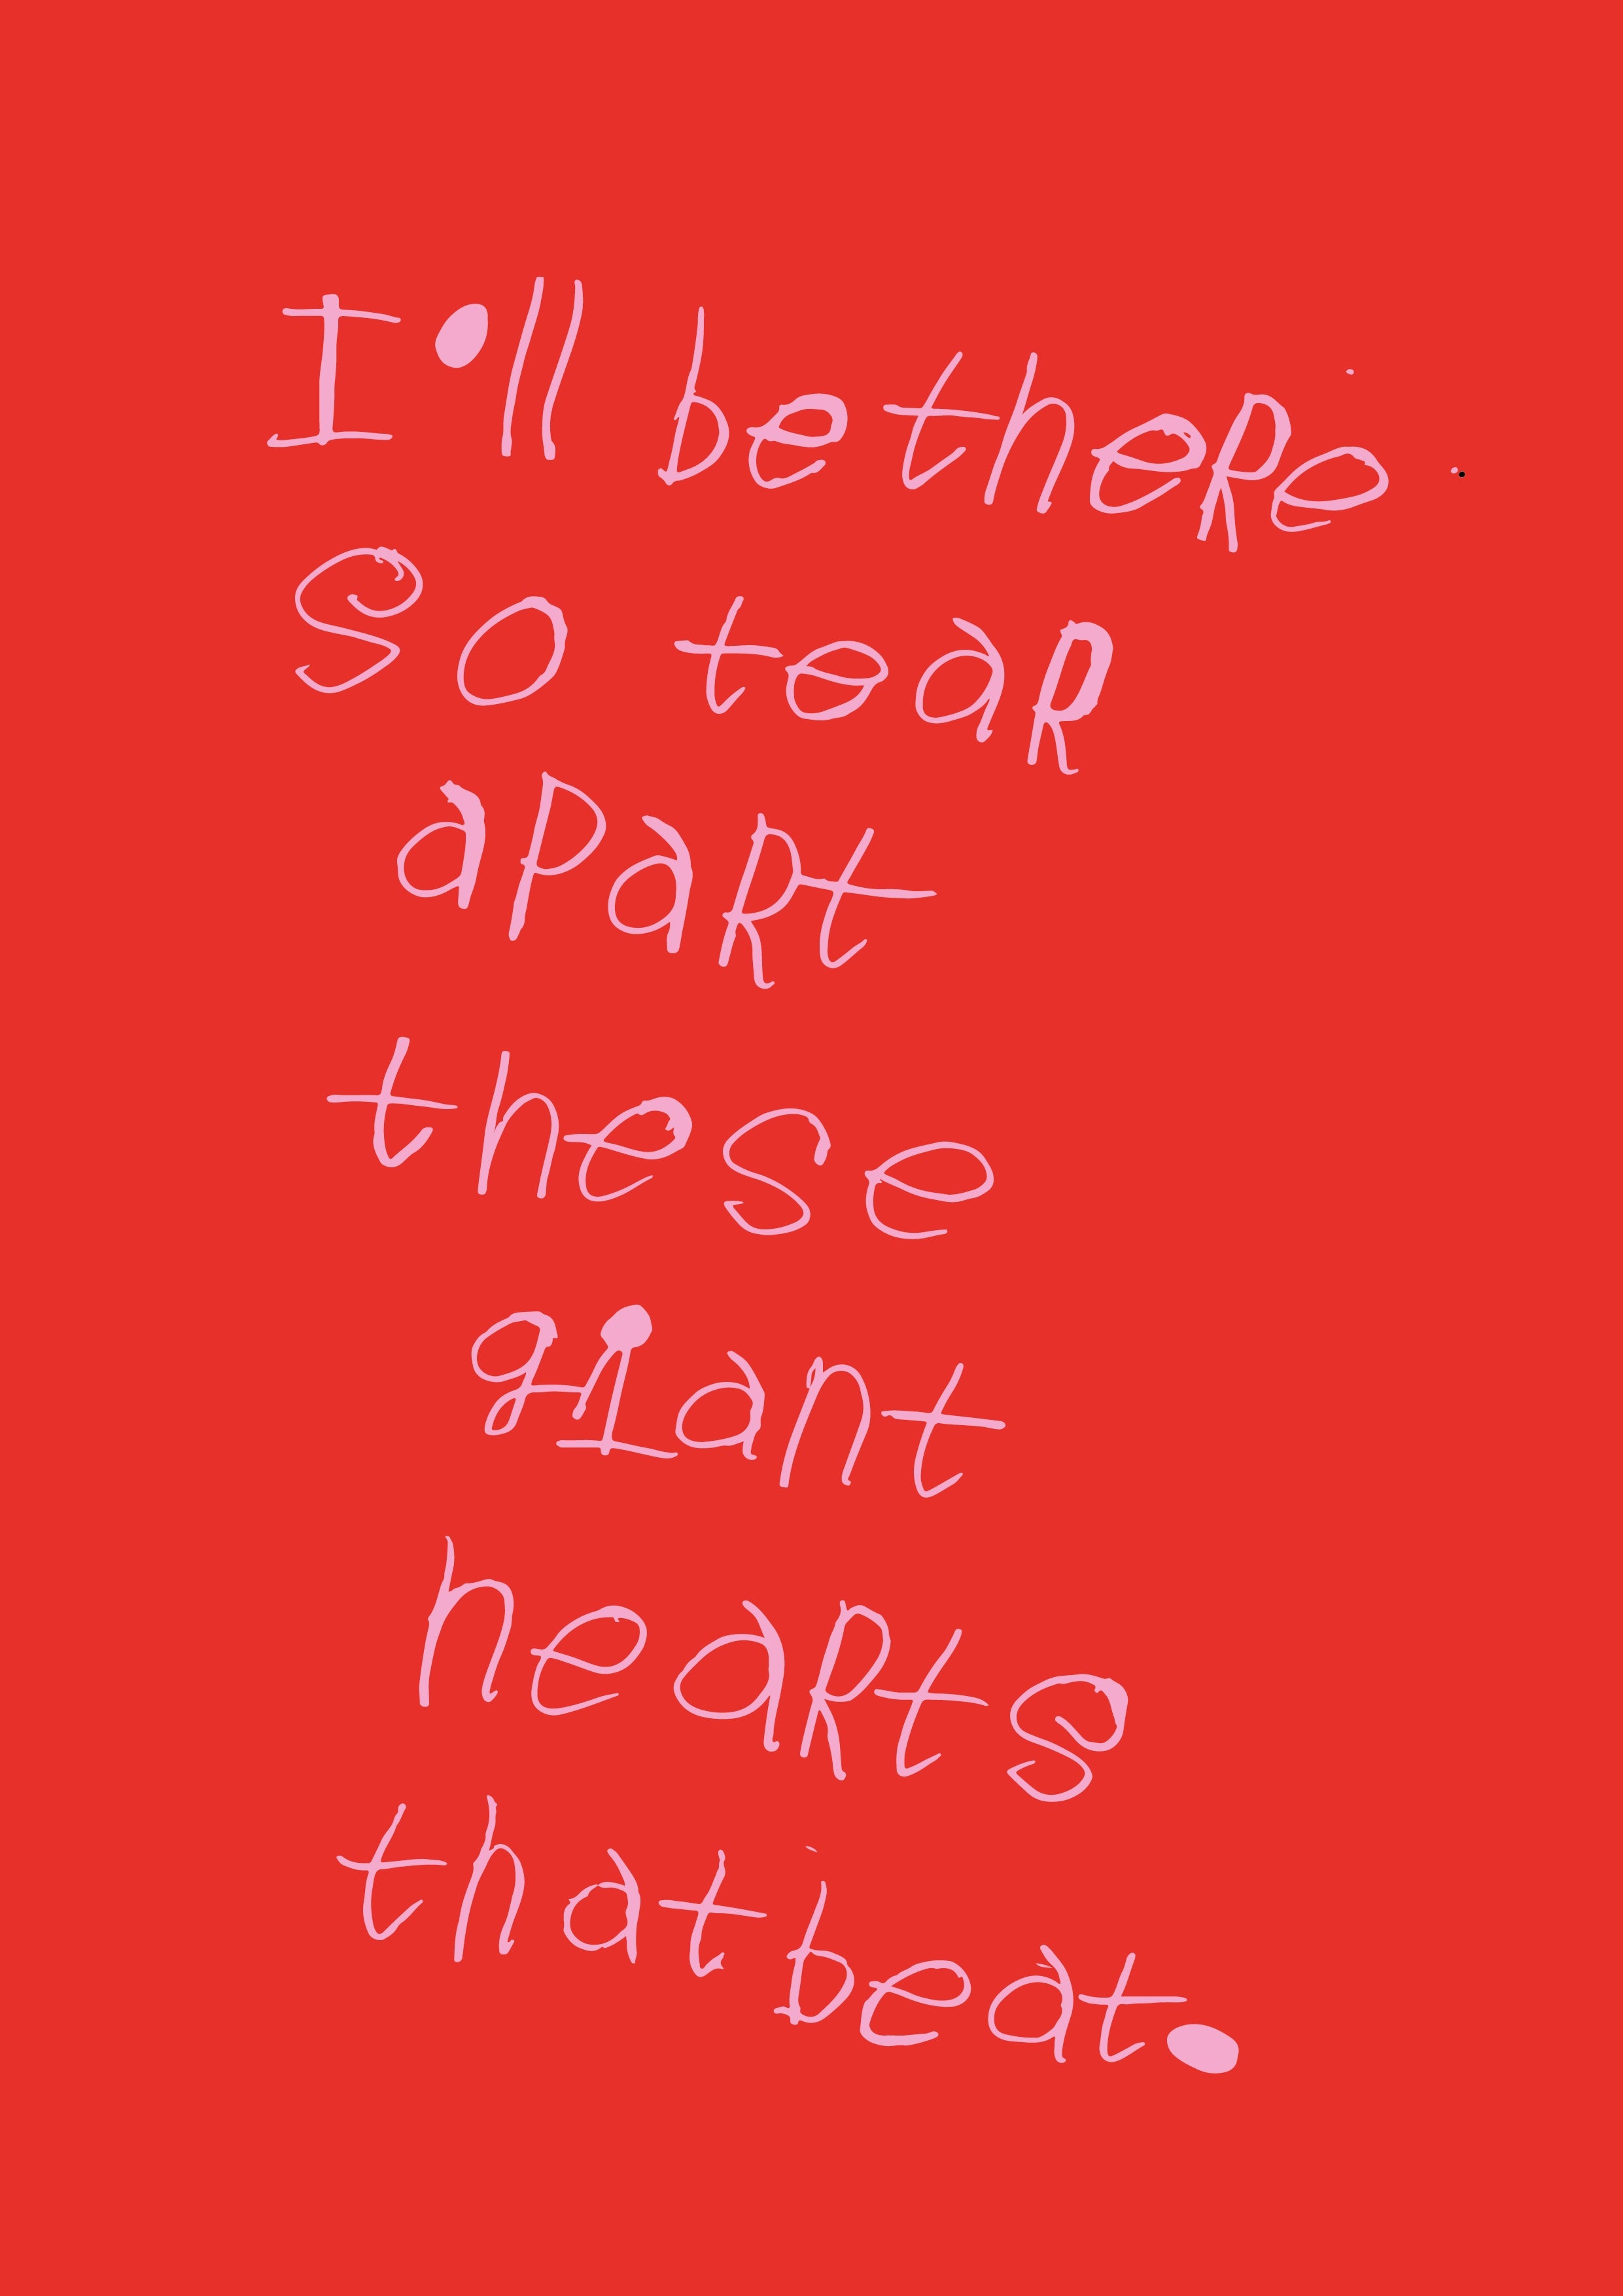 I'll be there so tear apart these giant hearts that beat. by Notes by Piper